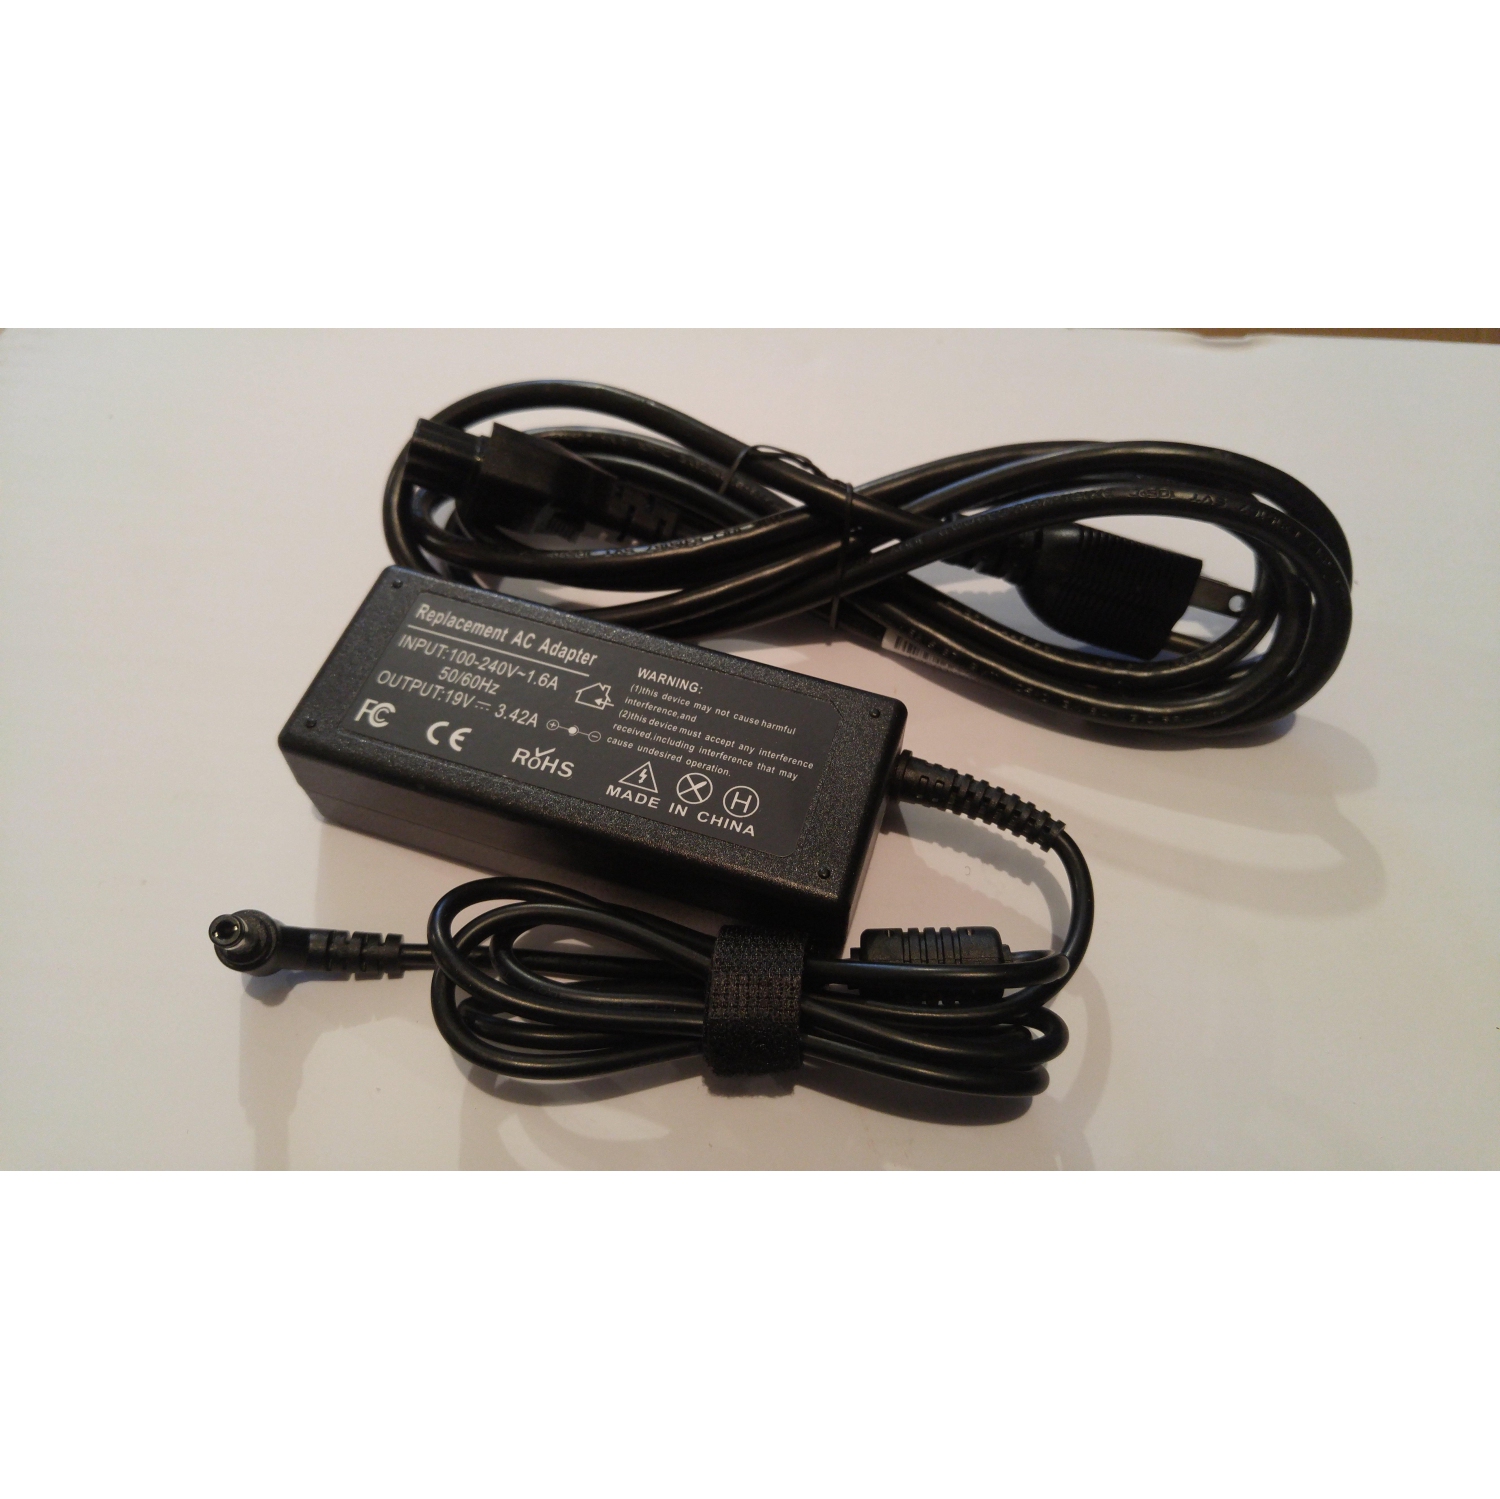 New Compatible Asus X55SV X55S X751SJ X751LA-TY042H X751LAV X751LA AC Adapter Charger 65W